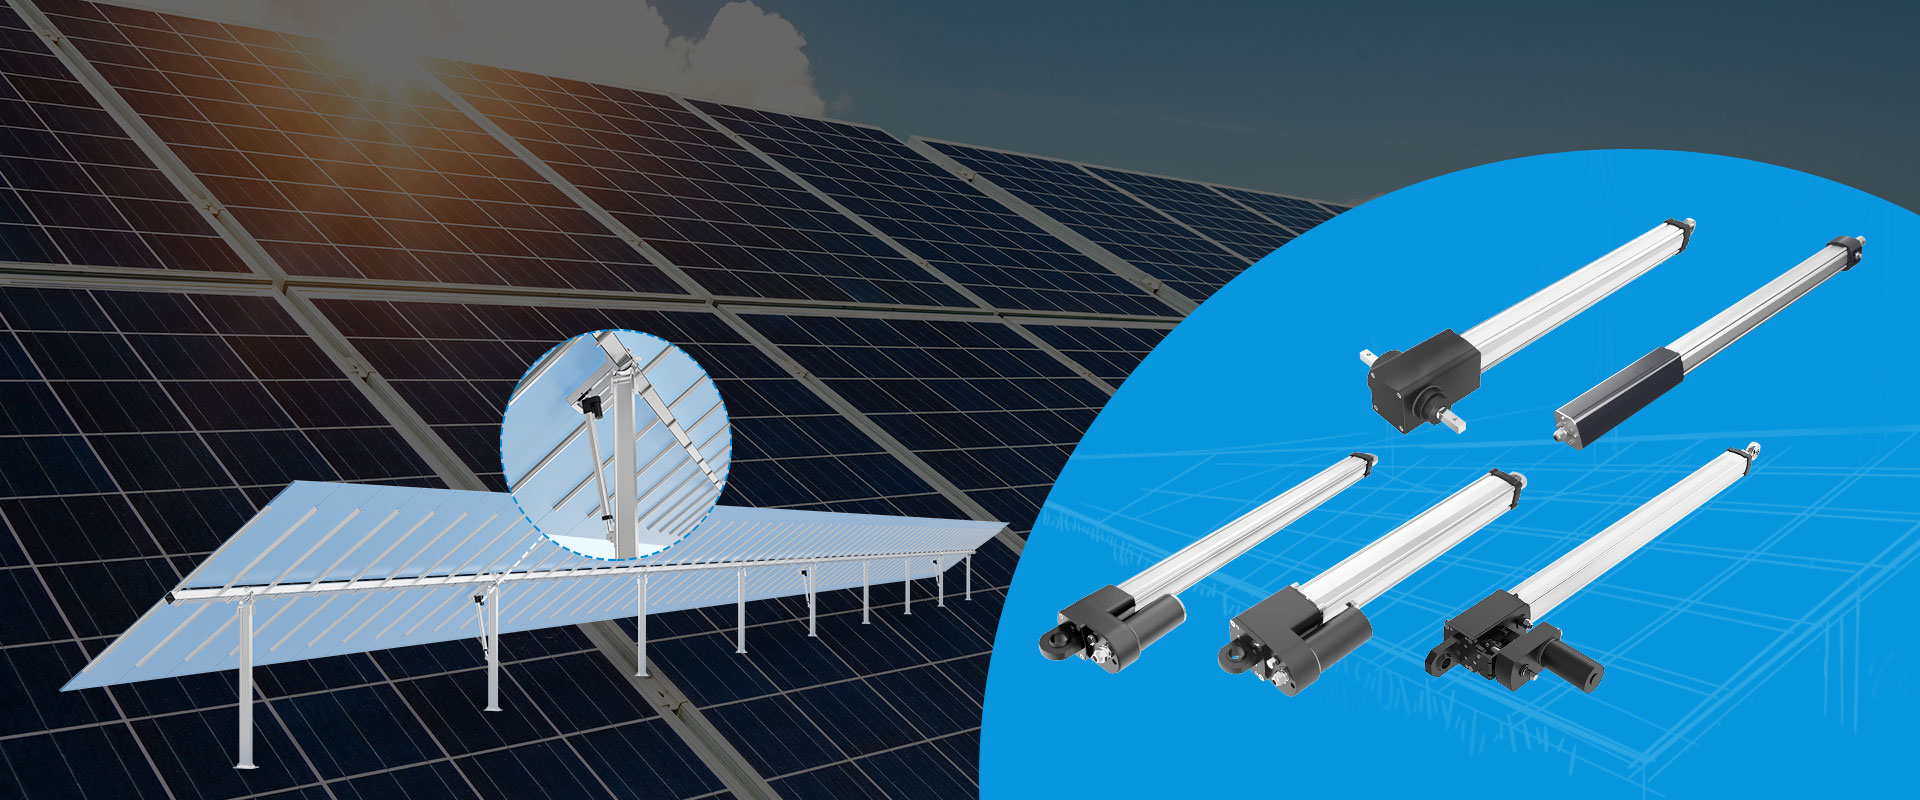  <div><strong><span style="font-size:38px;"><span style="font-family:Lexend Deca;">THE GLOBAL LEADER IN SOLAR LINEAR TRACKERS<br> FOR PV AND CSP TRACKING SYSTEMS</span></span></strong></div> <link href="https://fonts.googleapis.com/css?family=Lexend Deca" rel="stylesheet" type="text/css"> 